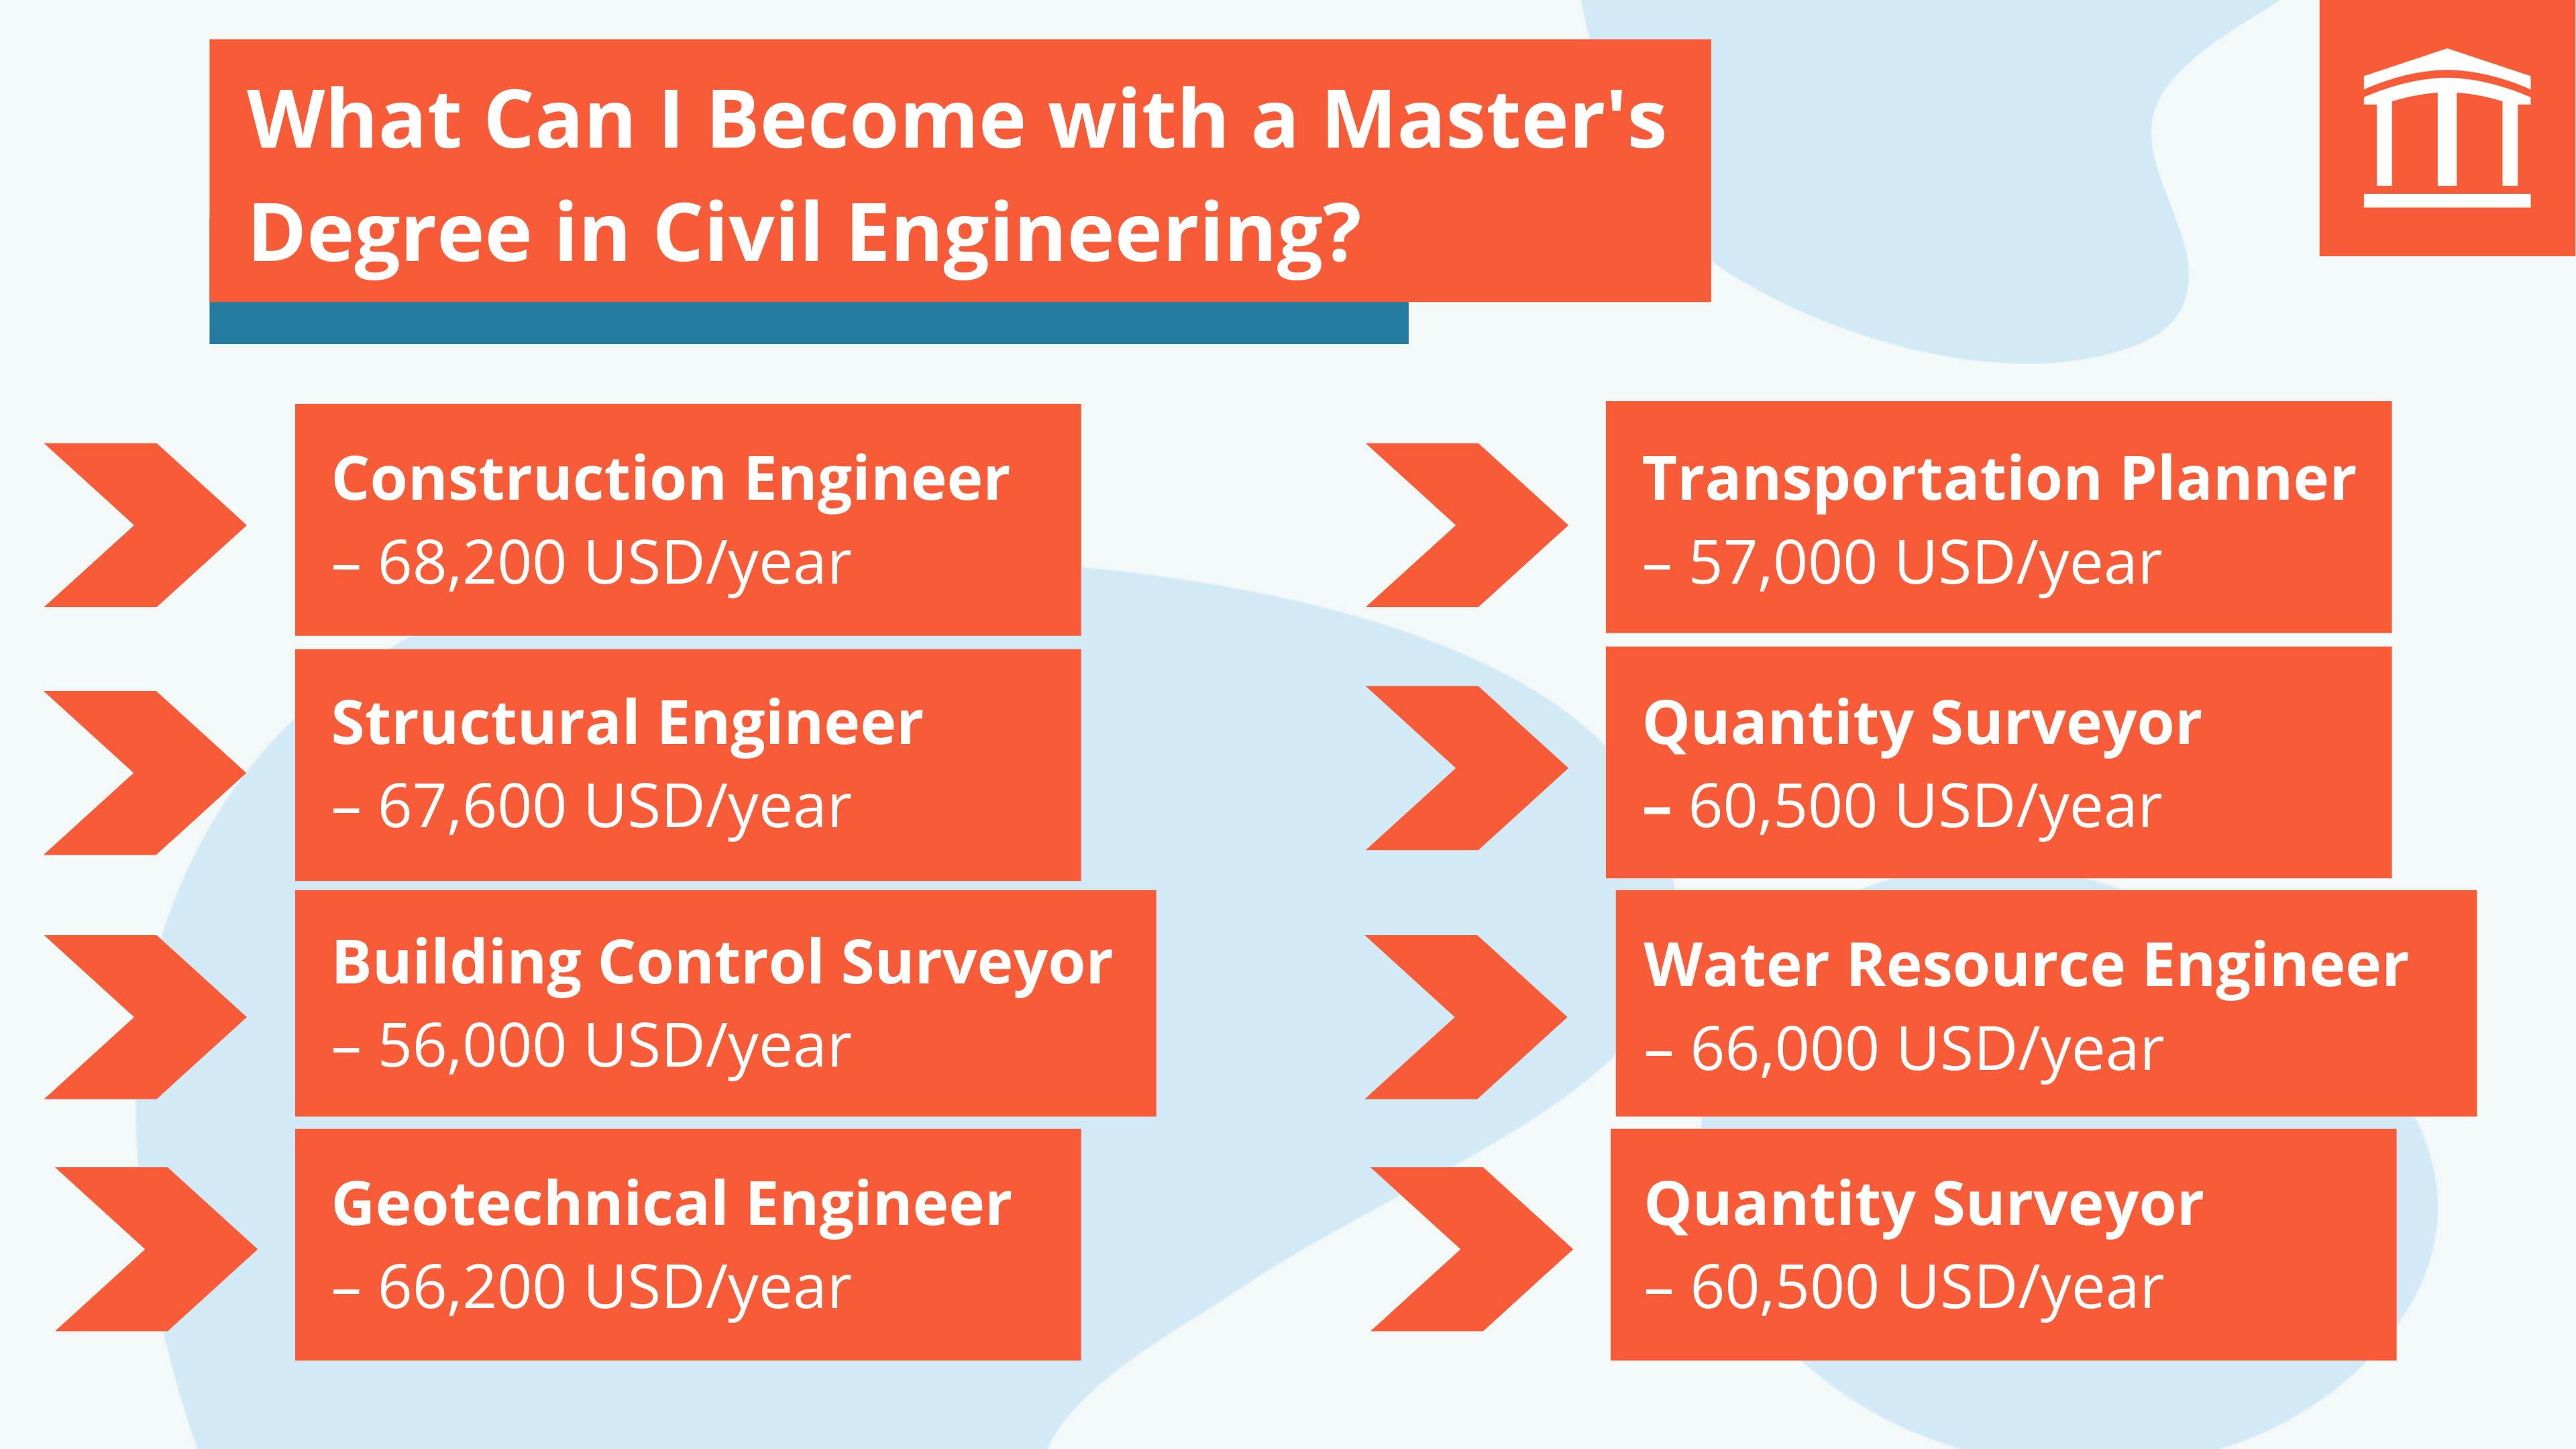 What Can I with a Master's Degree in Civil Engineering